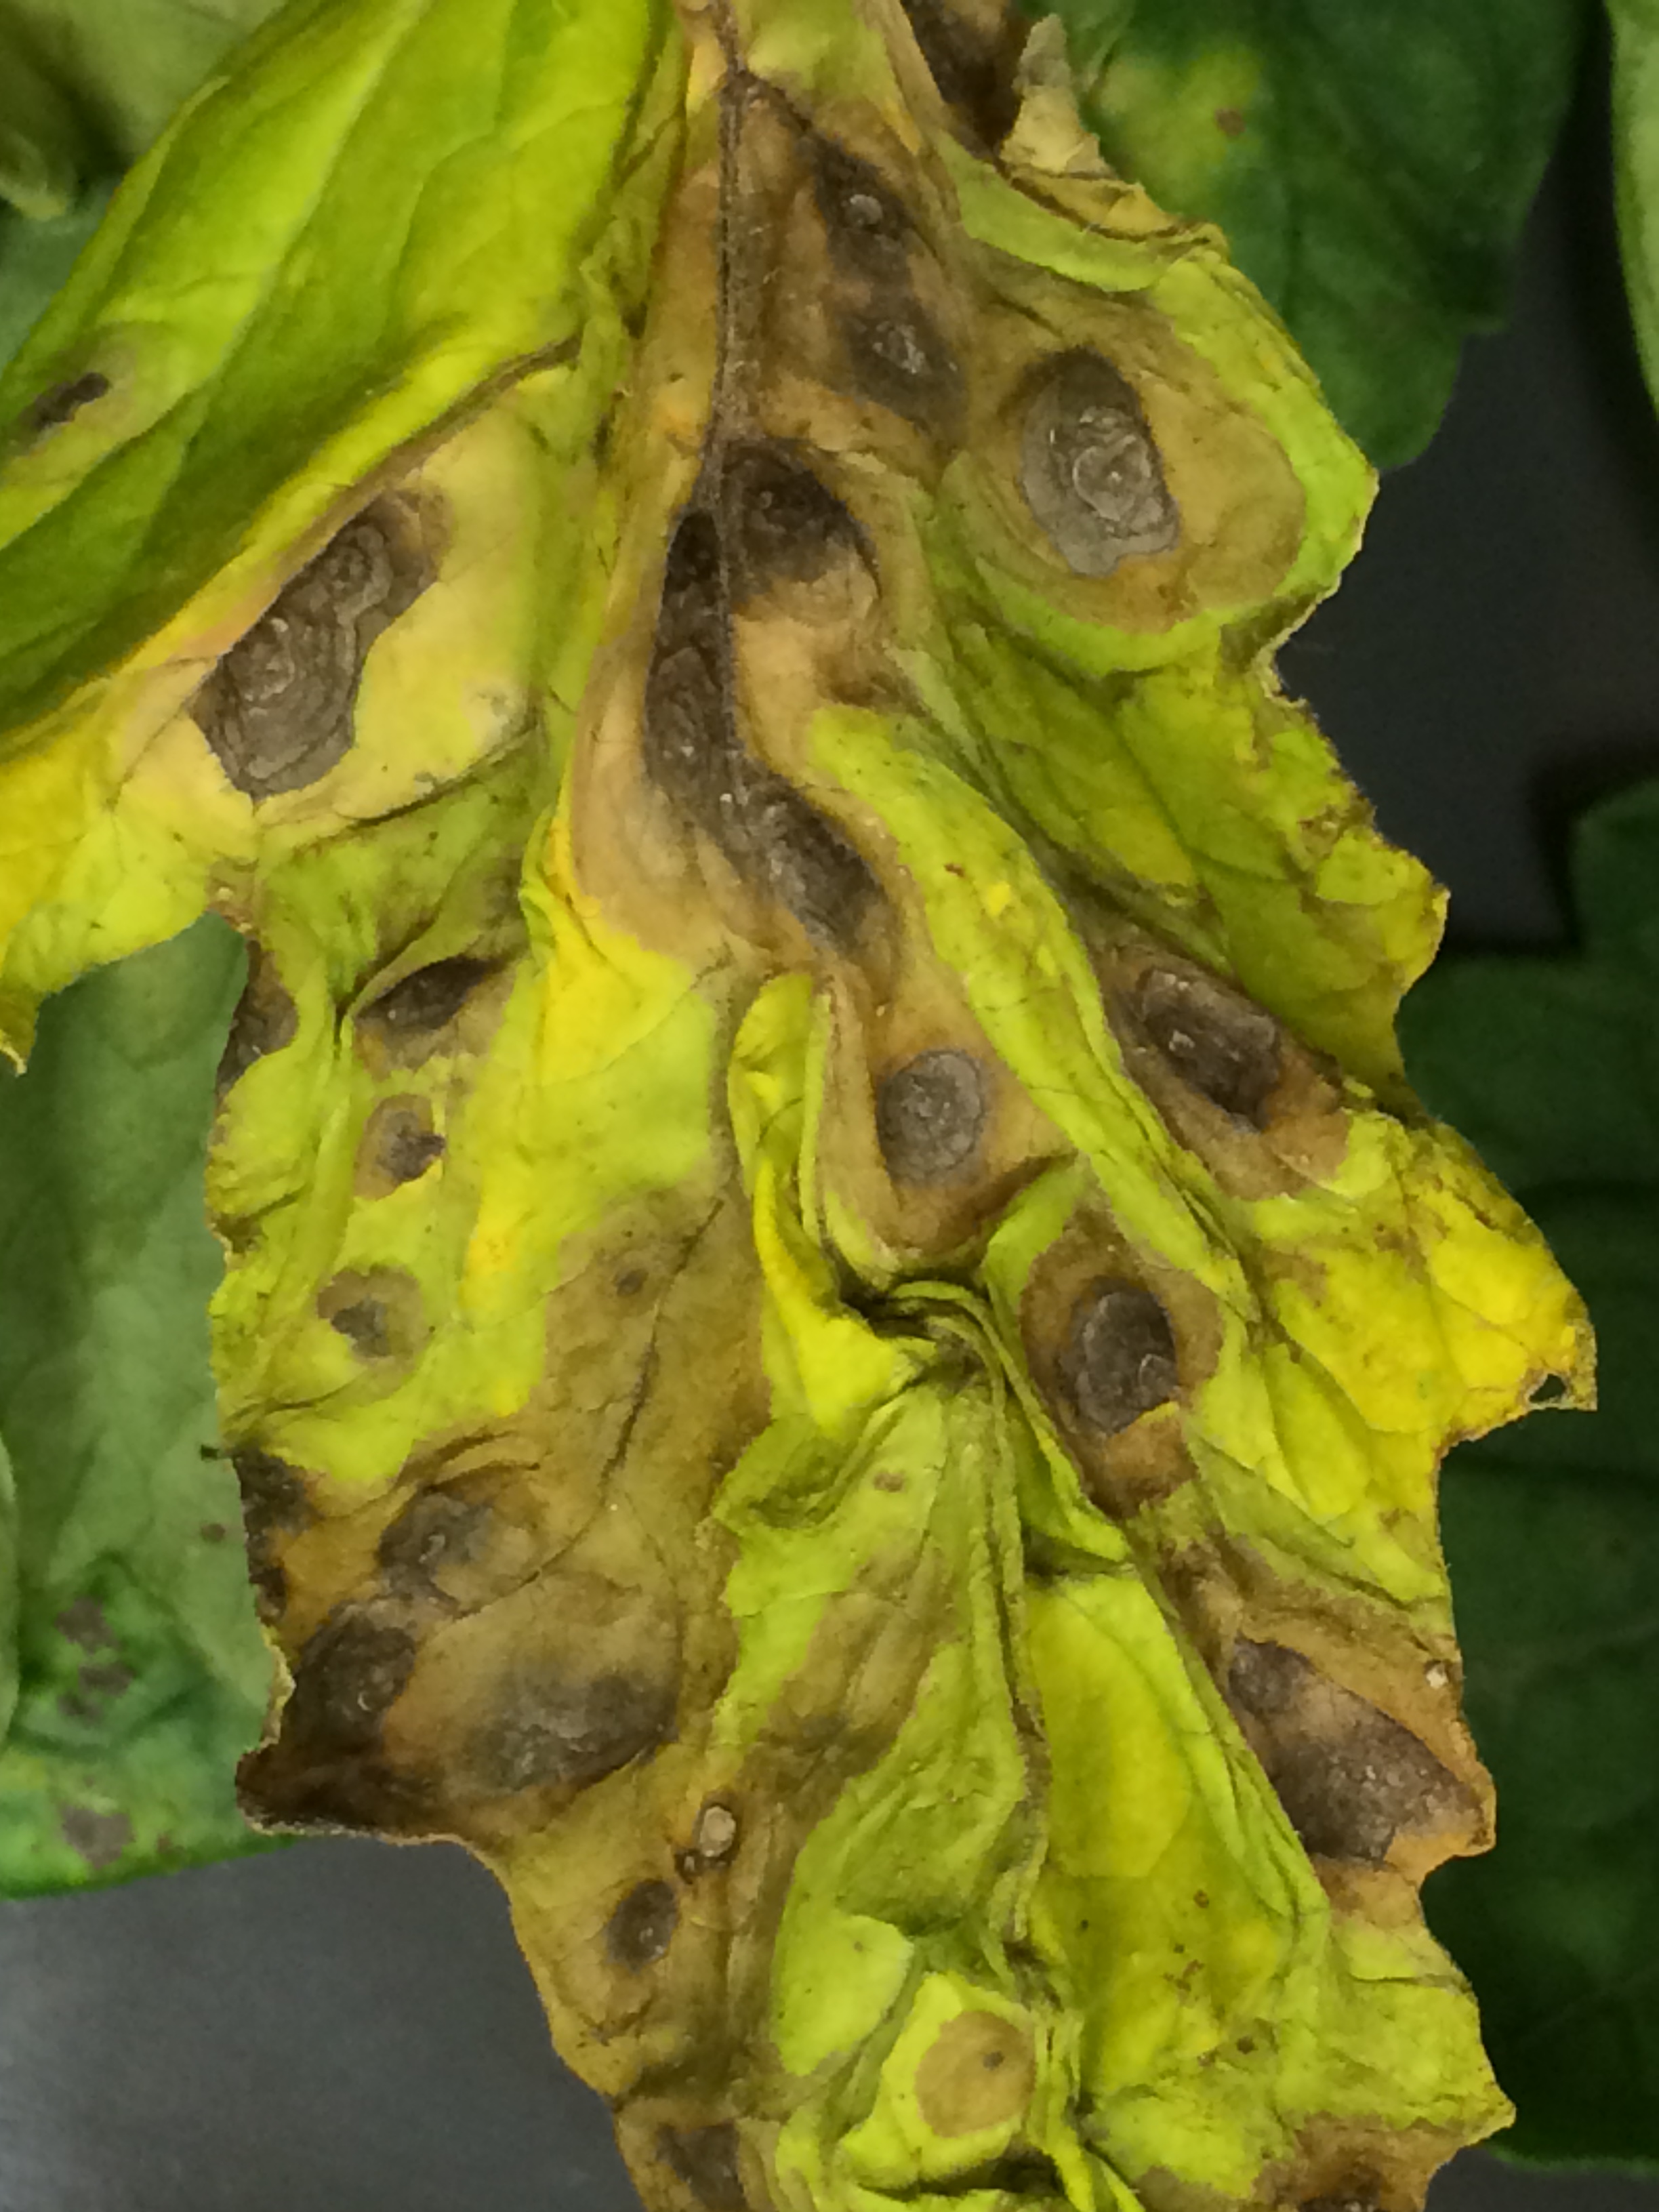 Symptoms of early blight on a tomato leaflet.